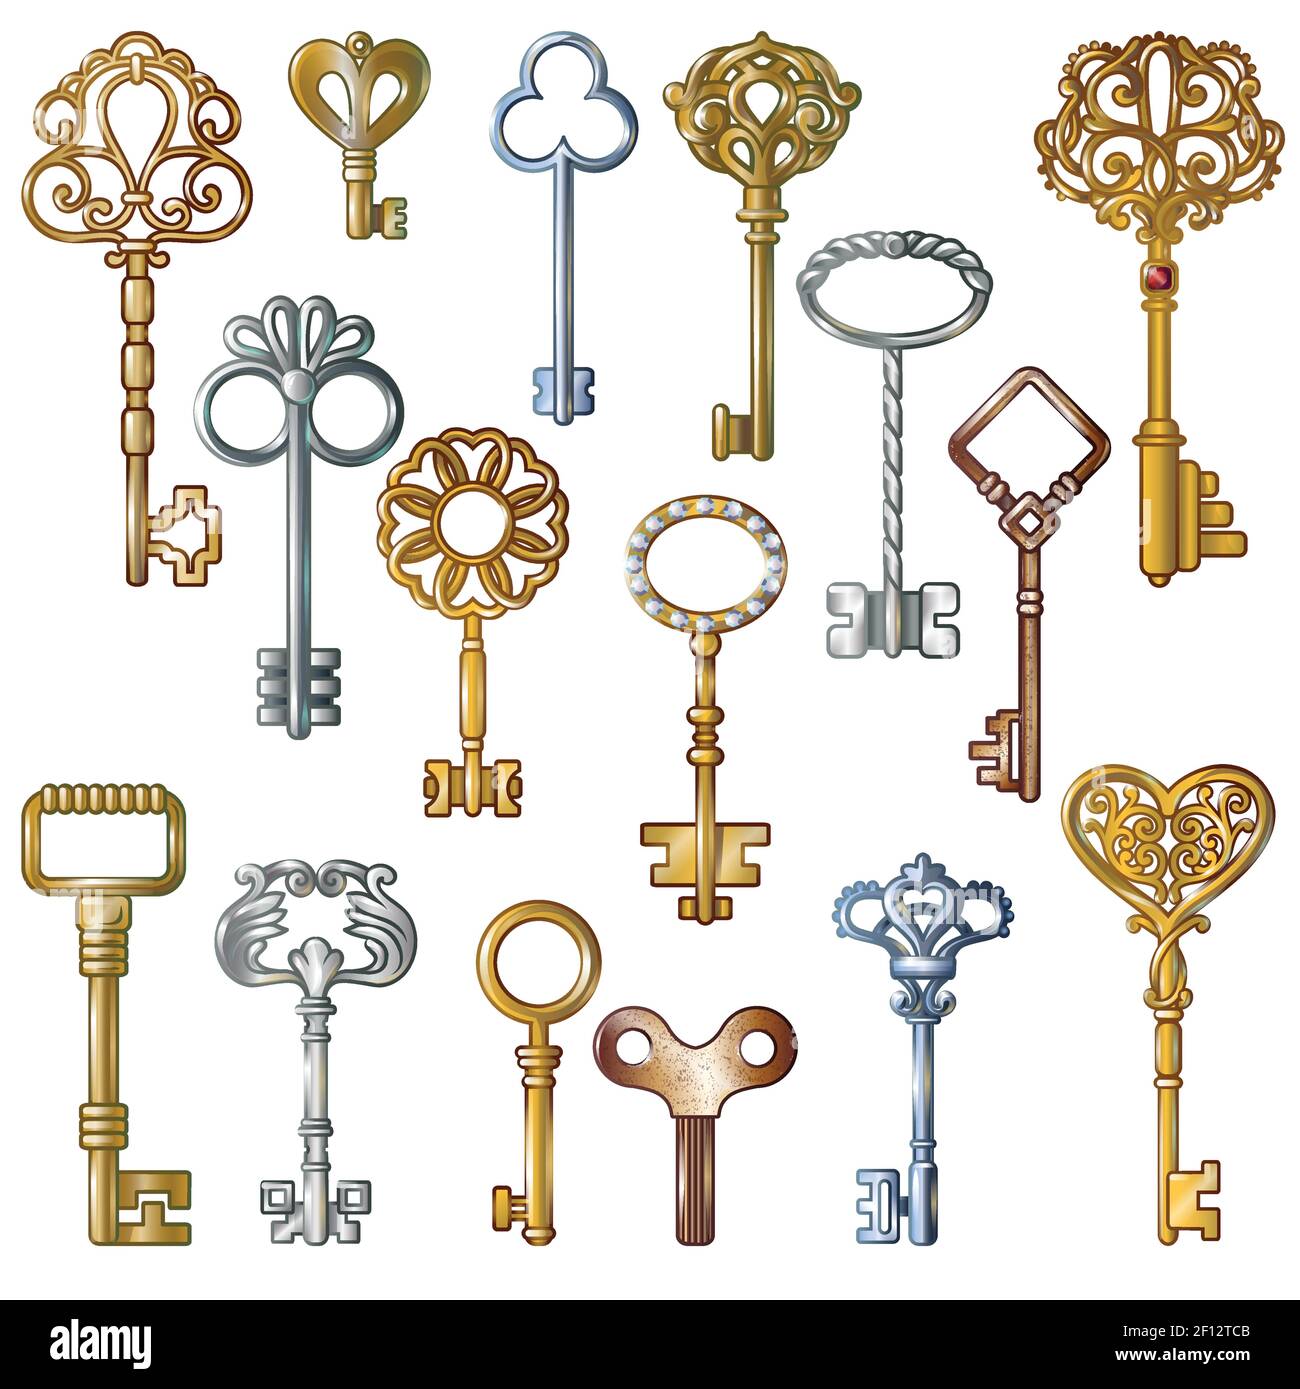 Isolated images of realistic vintage keys with golden silver and bronze decorative symbols on blank background vector illustration Stock Vector